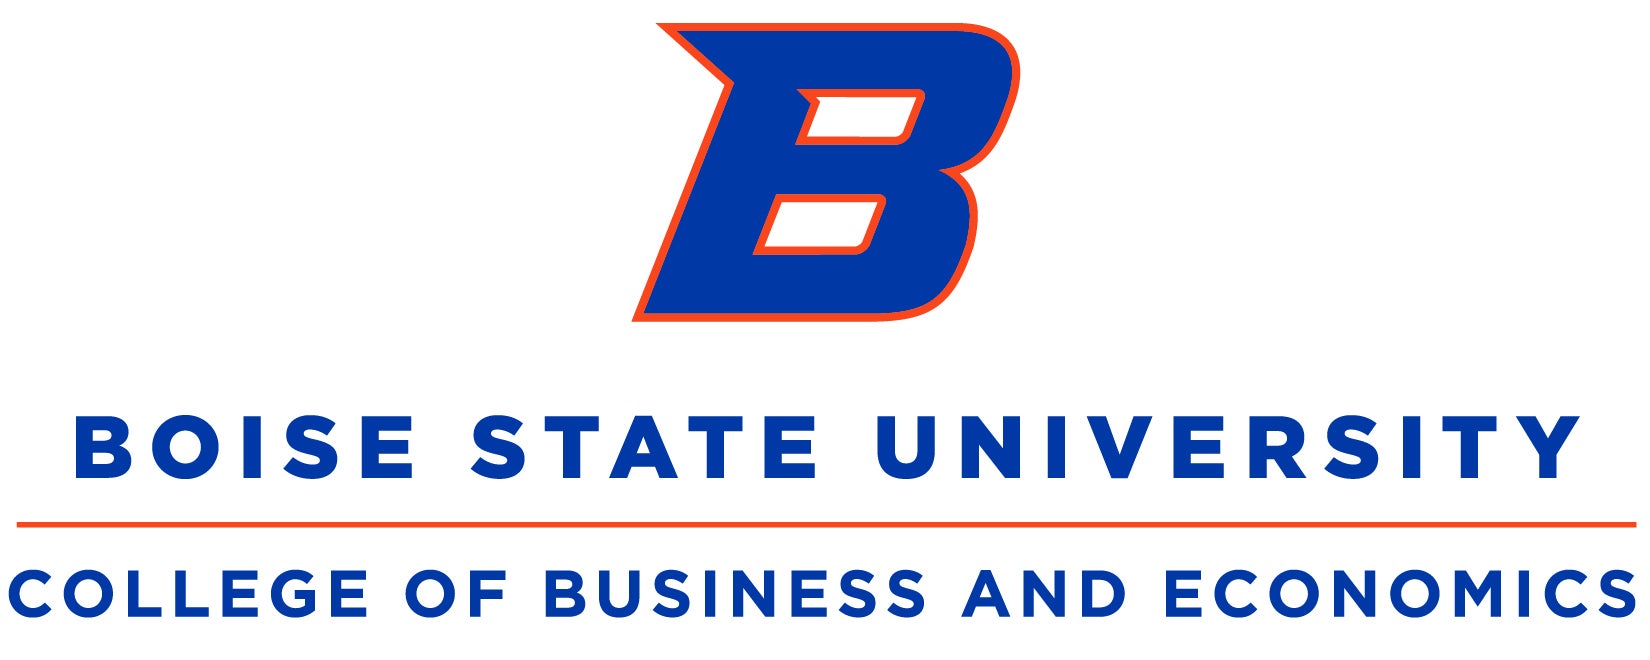 Boise State college of business and economics logo